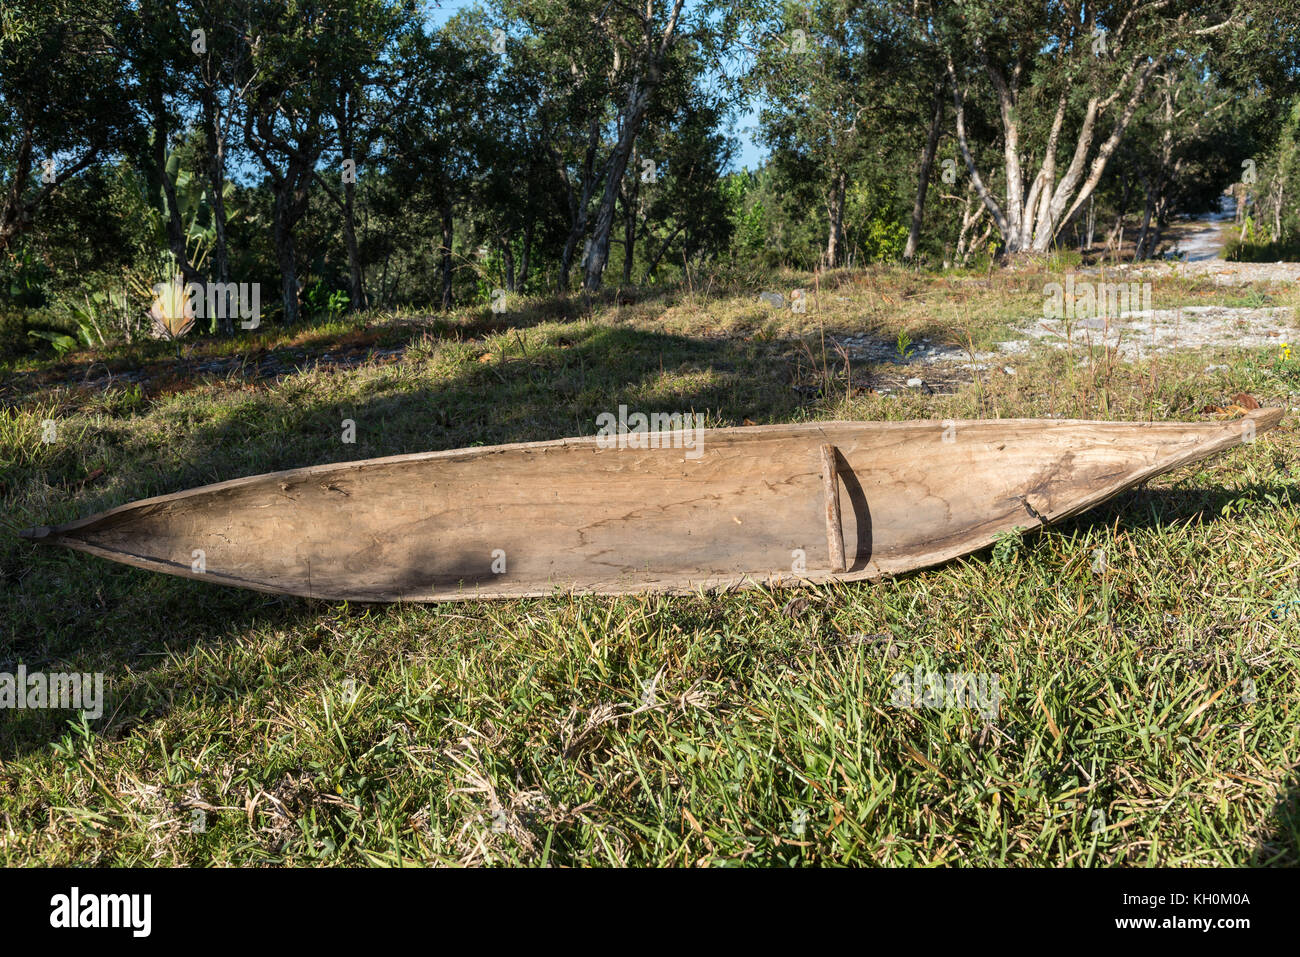 A dugout canoe used by local Malagasy people. Madagascar, Africa Stock Photo